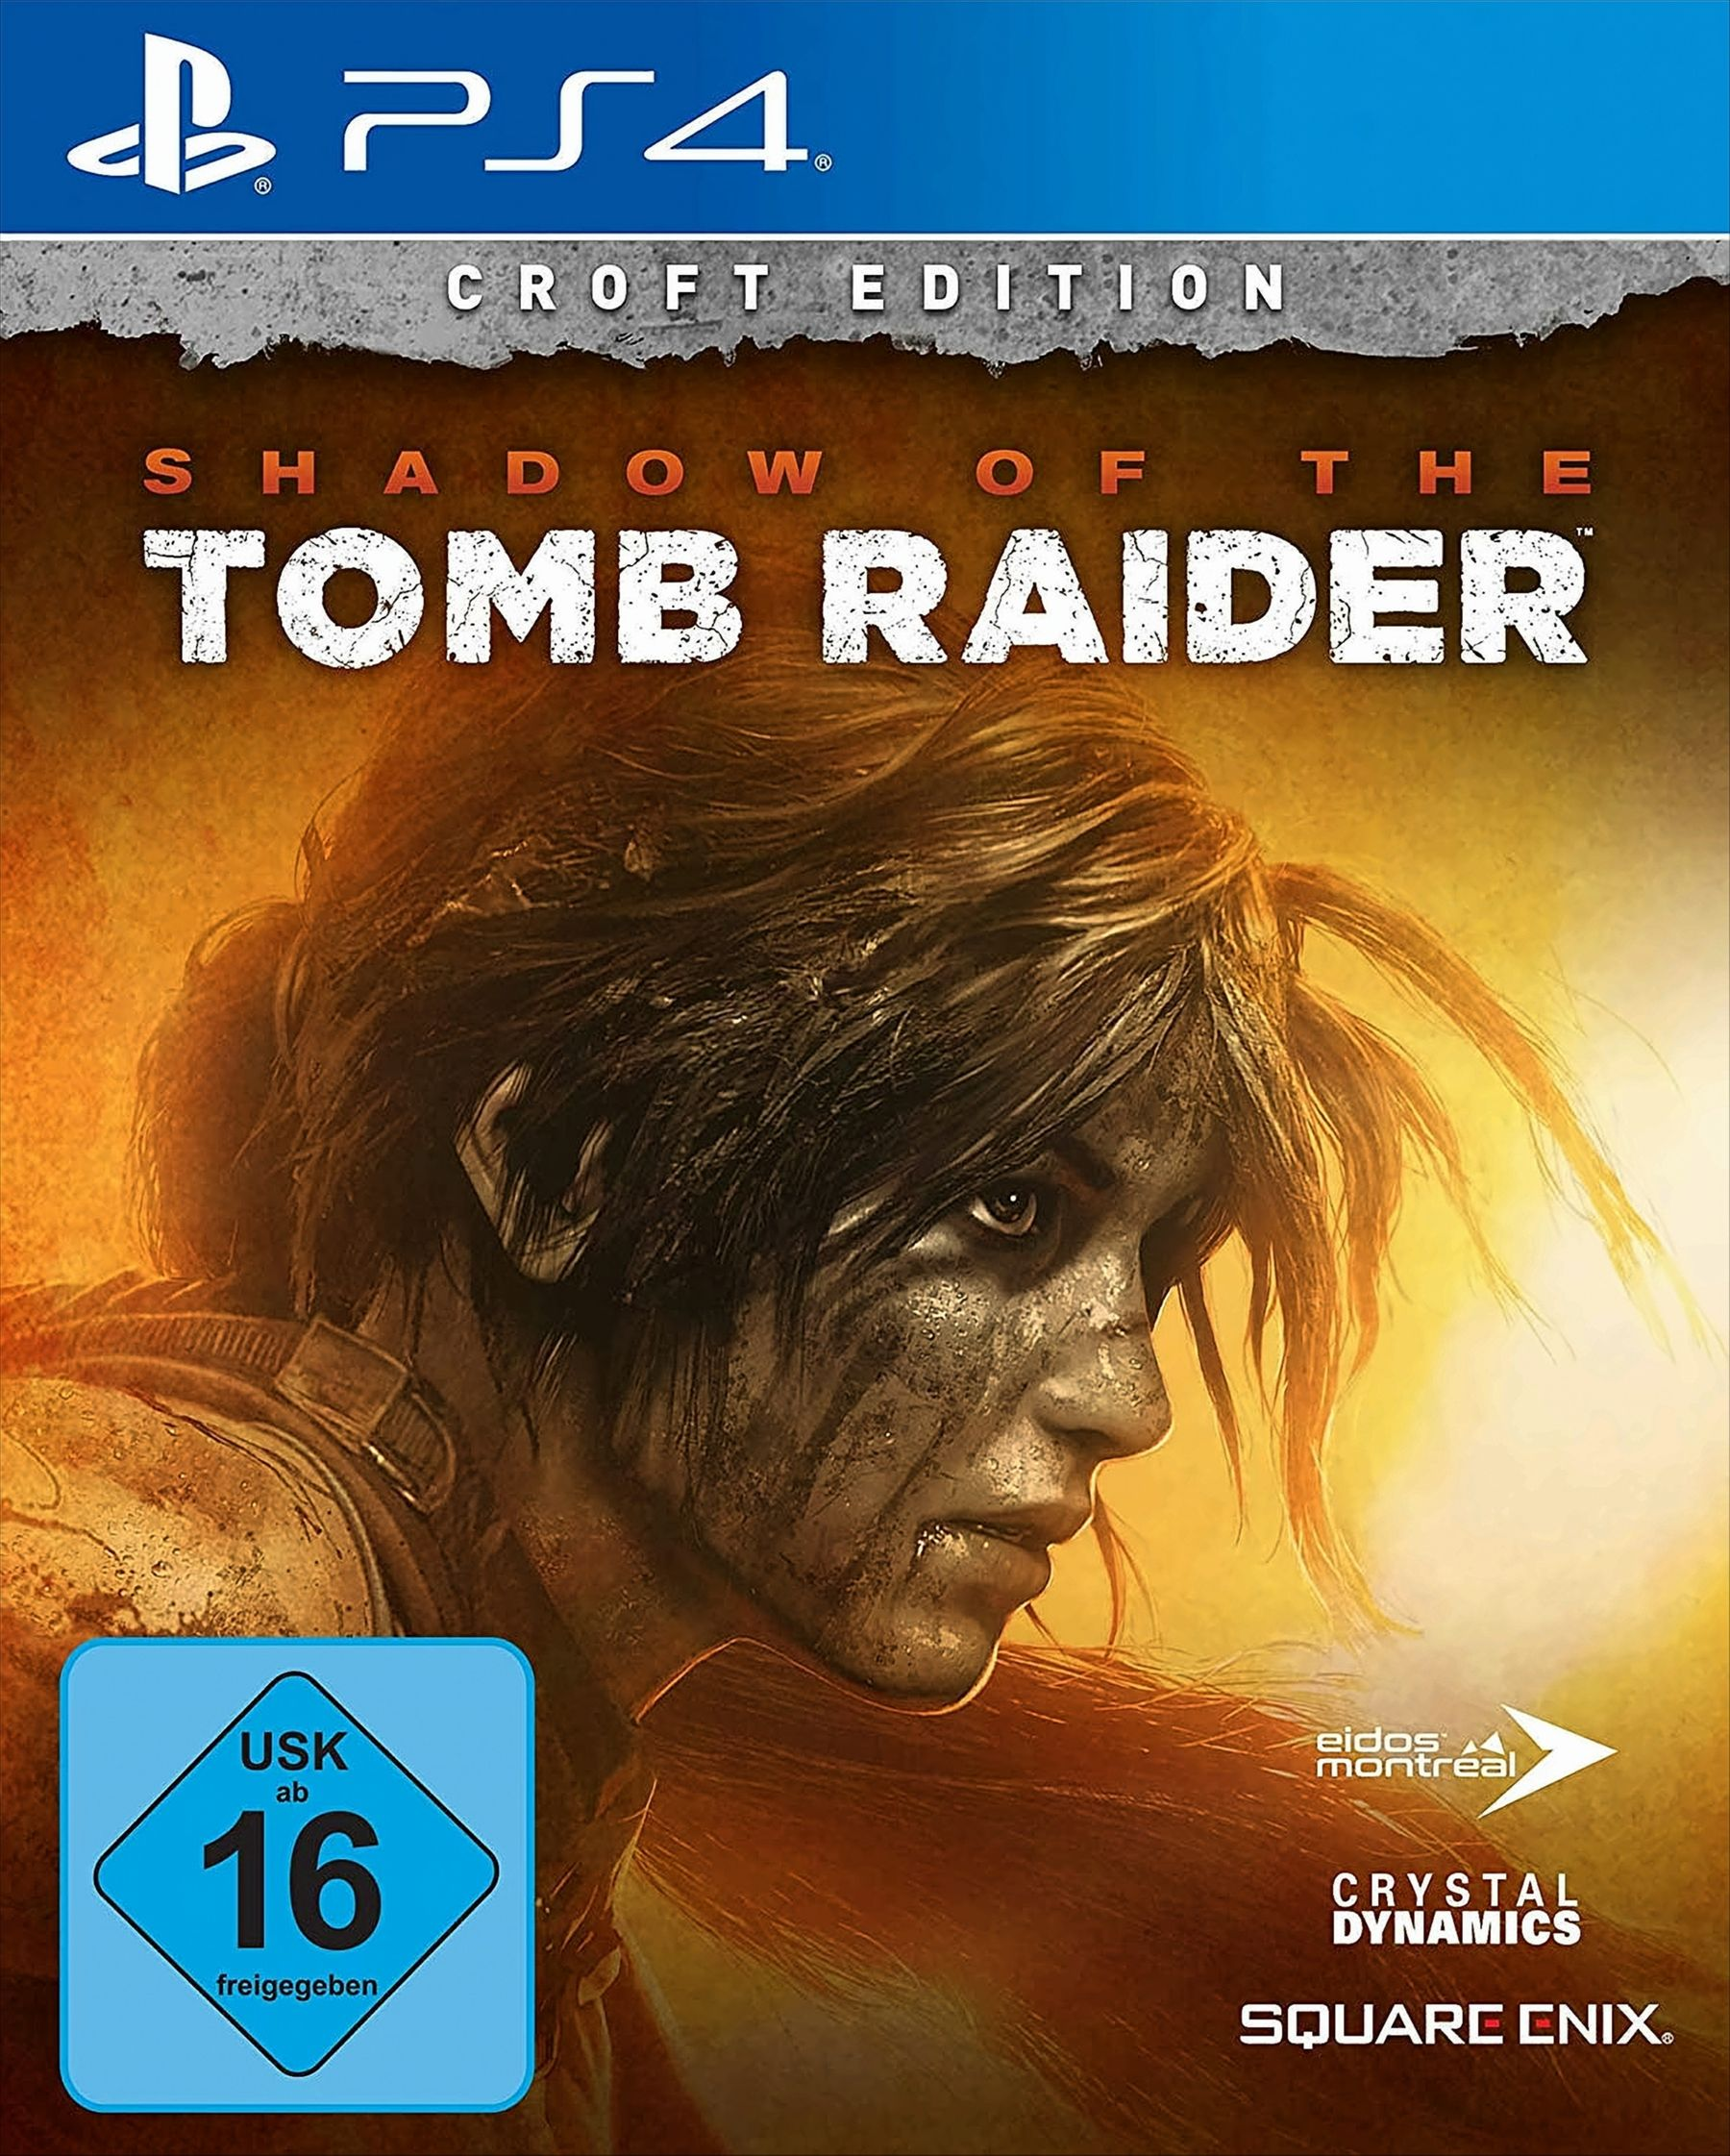 Raider Croft the Edition [PlayStation - Tomb of (PS4) 4] Shadow (USK)